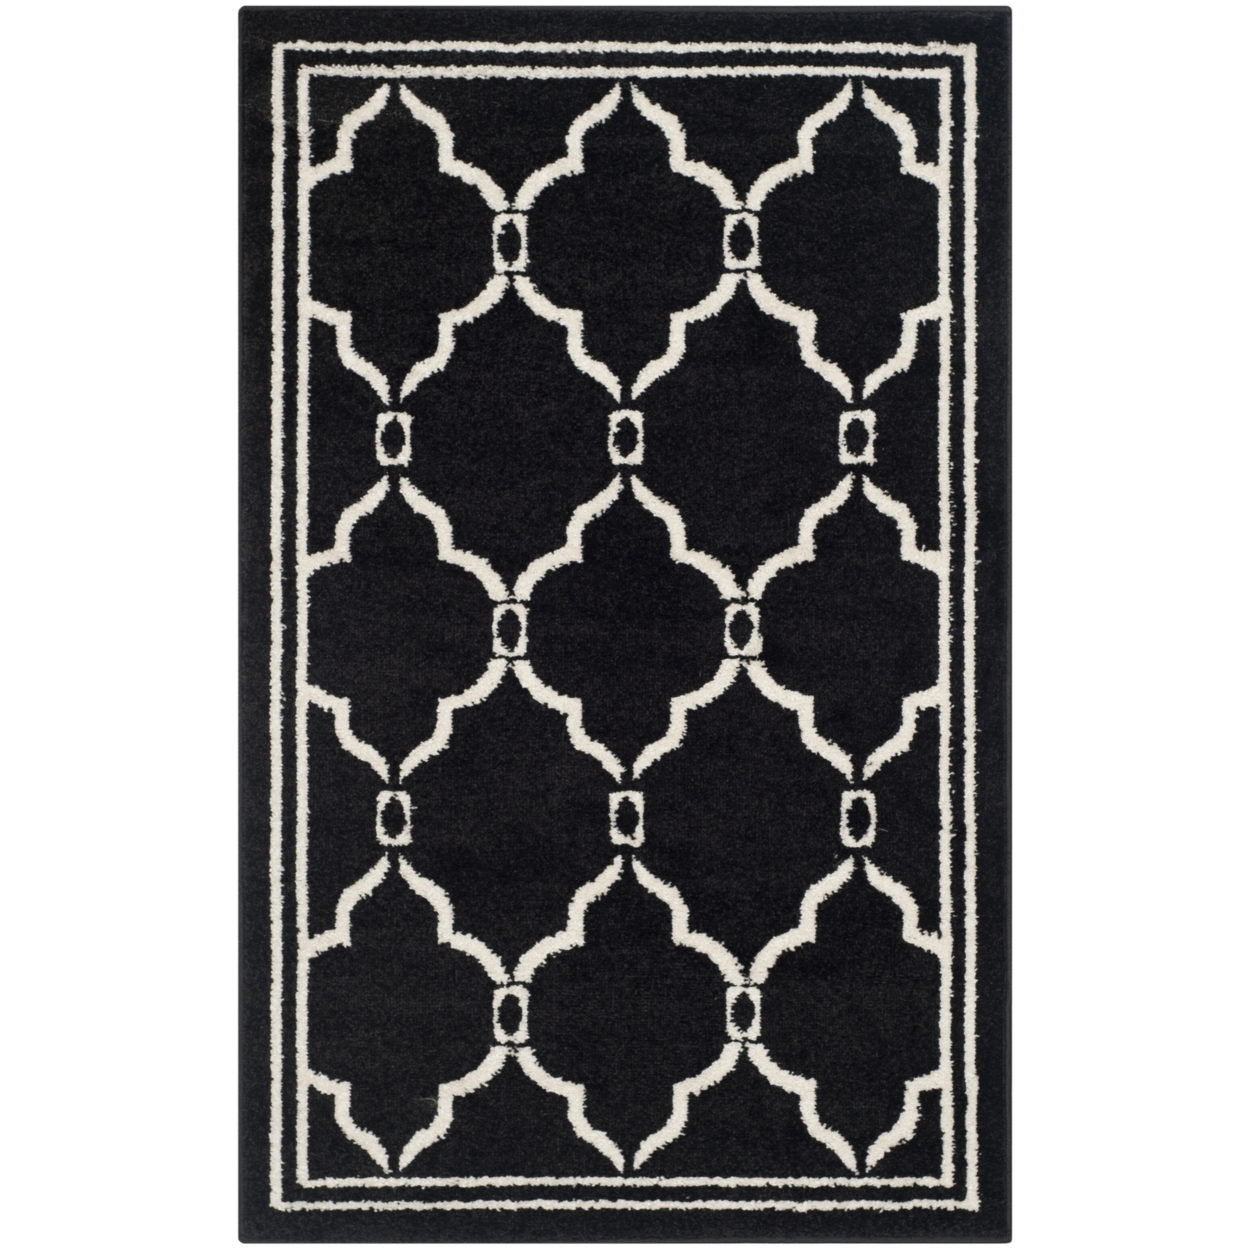 SAFAVIEH Amherst Collection AMT414G Anthracite/Ivory Rug - 2' 6 X 4'